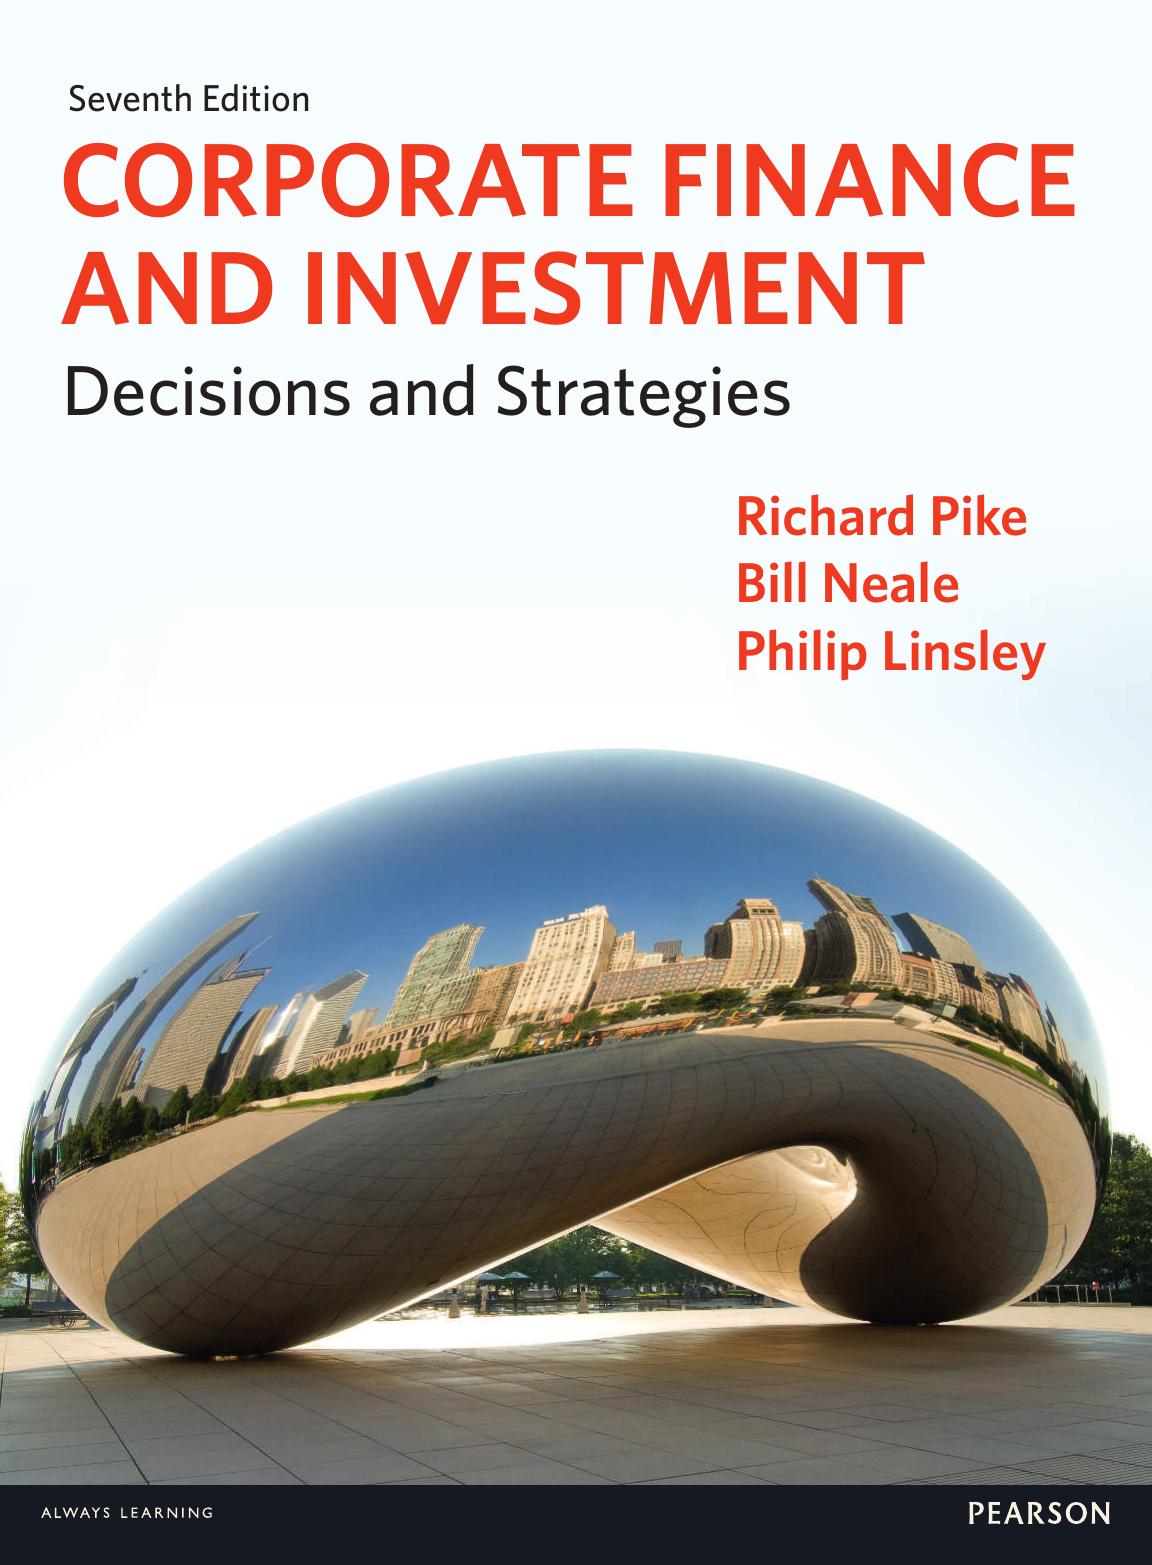 Corporate Finance and Investment 7th Edition by Richard Pike.jpg